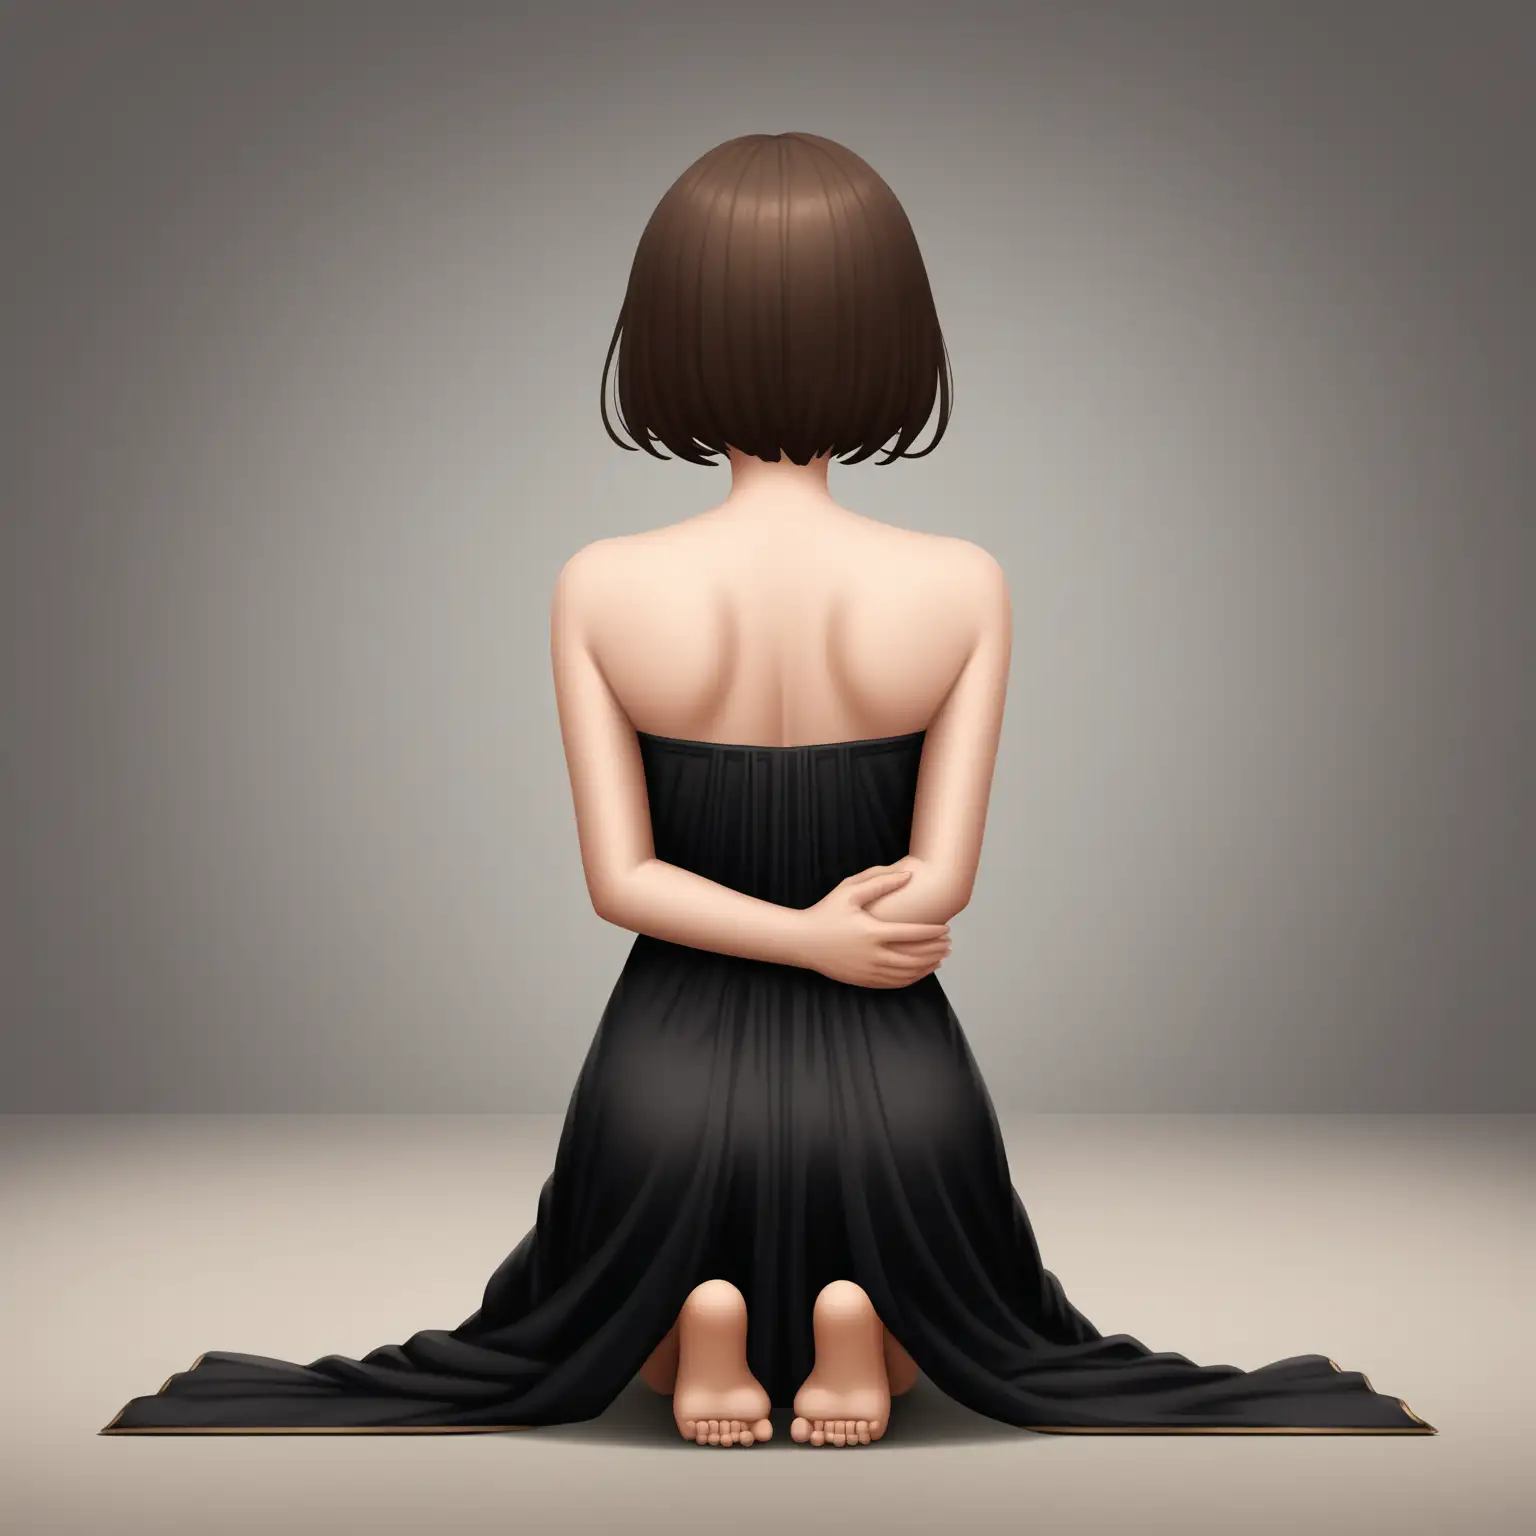 Emoji female with very short brown hair that is very shorter on the sides and long on top, wearing all black, and kneeling on the floor in devotion with hands behind her back, very respectful, the image view is from behind her